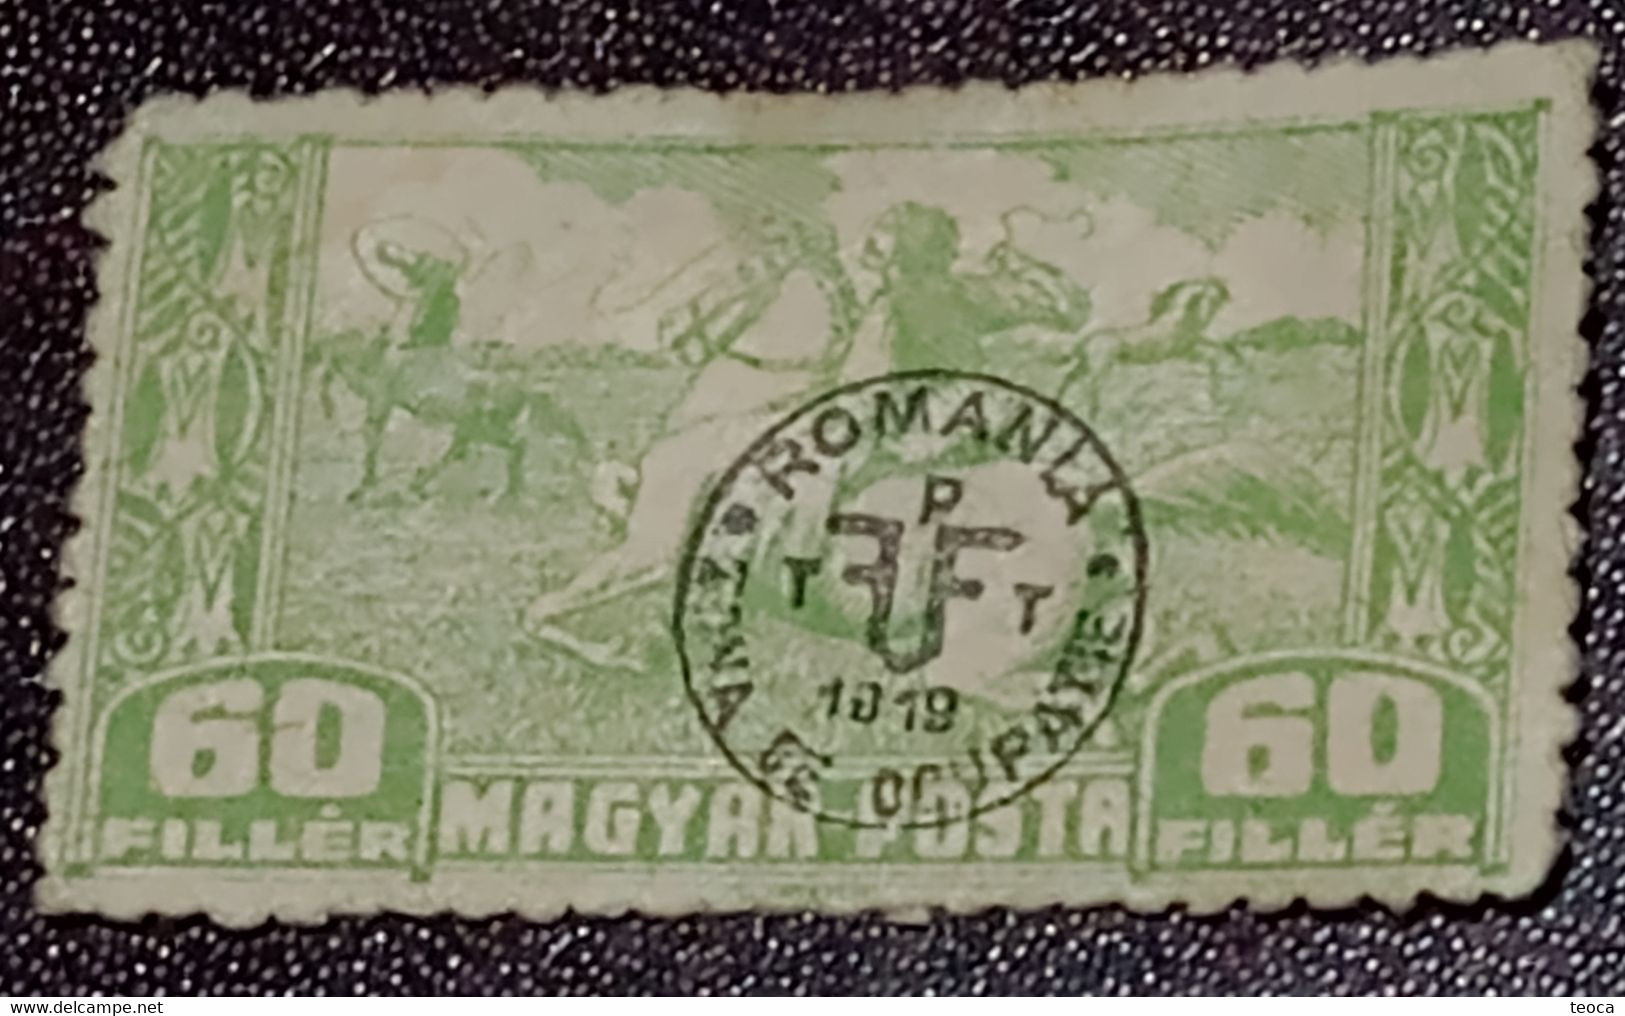 Errors  Romania 1919  Transylvania, Zone Occupation Printed With  Misplaced Overprint PTT Broken And Pasted Letters "i" - Errors, Freaks & Oddities (EFO)